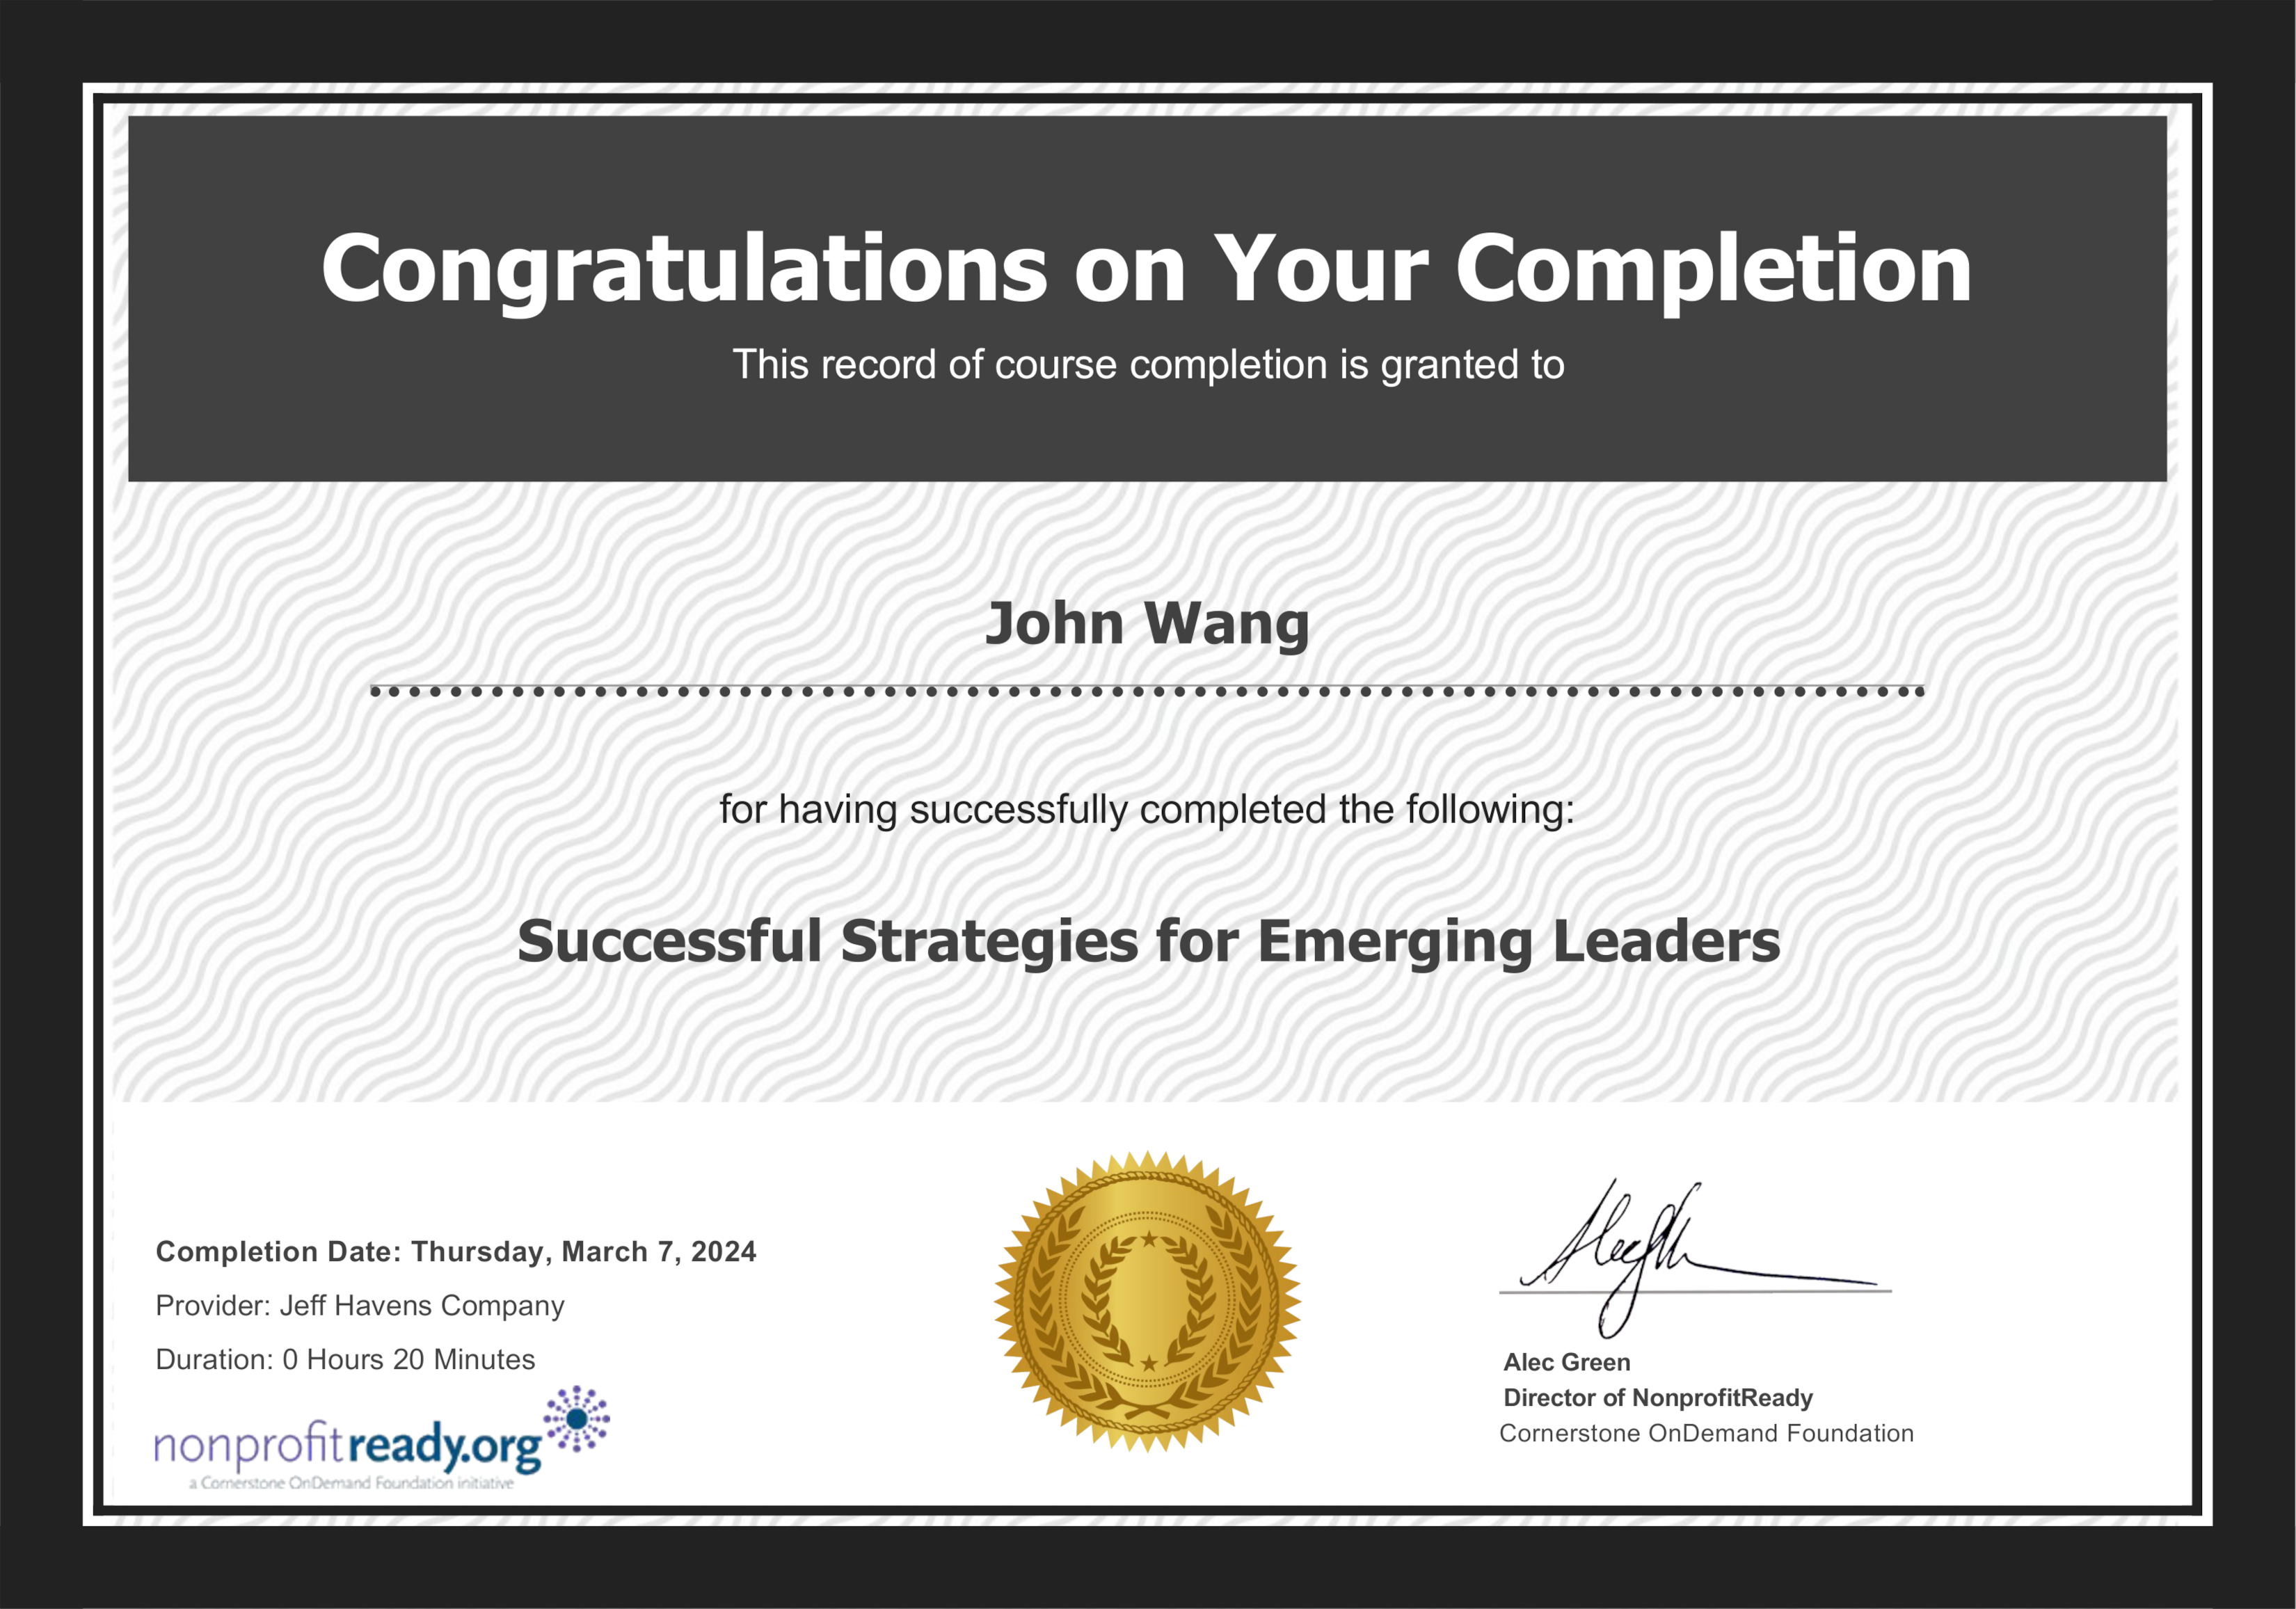 John's Successful Strategies for Emerging Leaders from NonprofitReady by The Jeff Havens Company